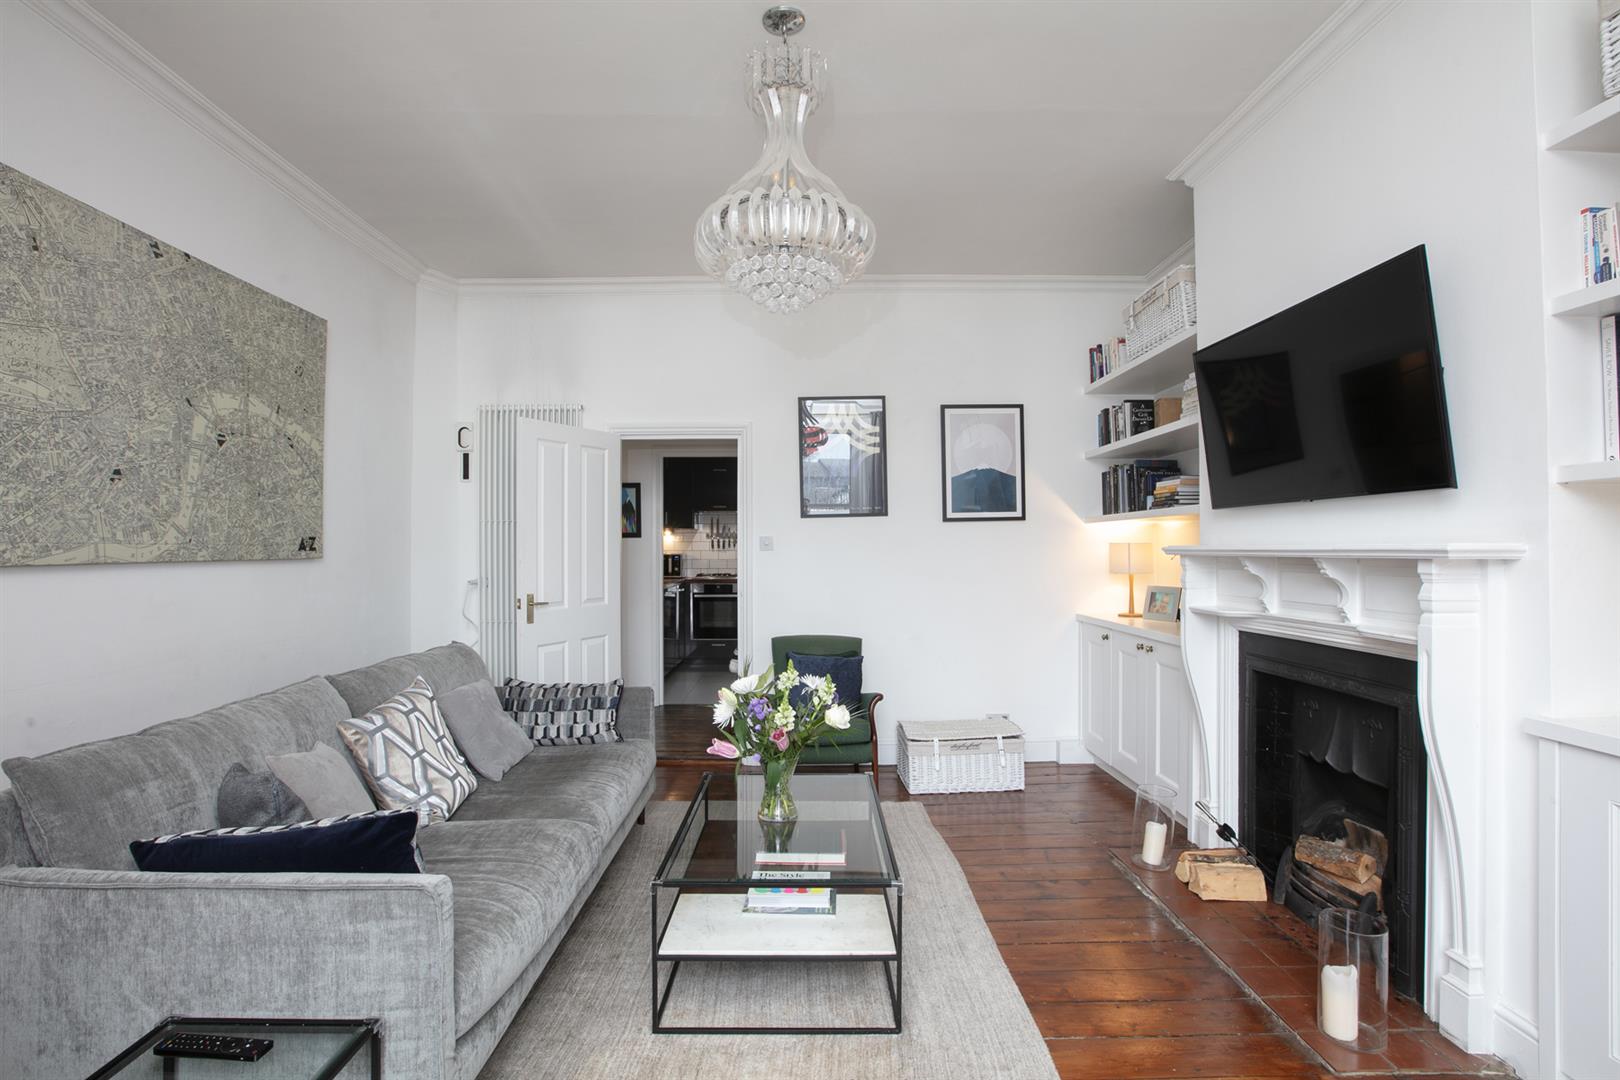 Flat - Conversion For Sale in Consort Road, Nunhead, SE15 1183 view5